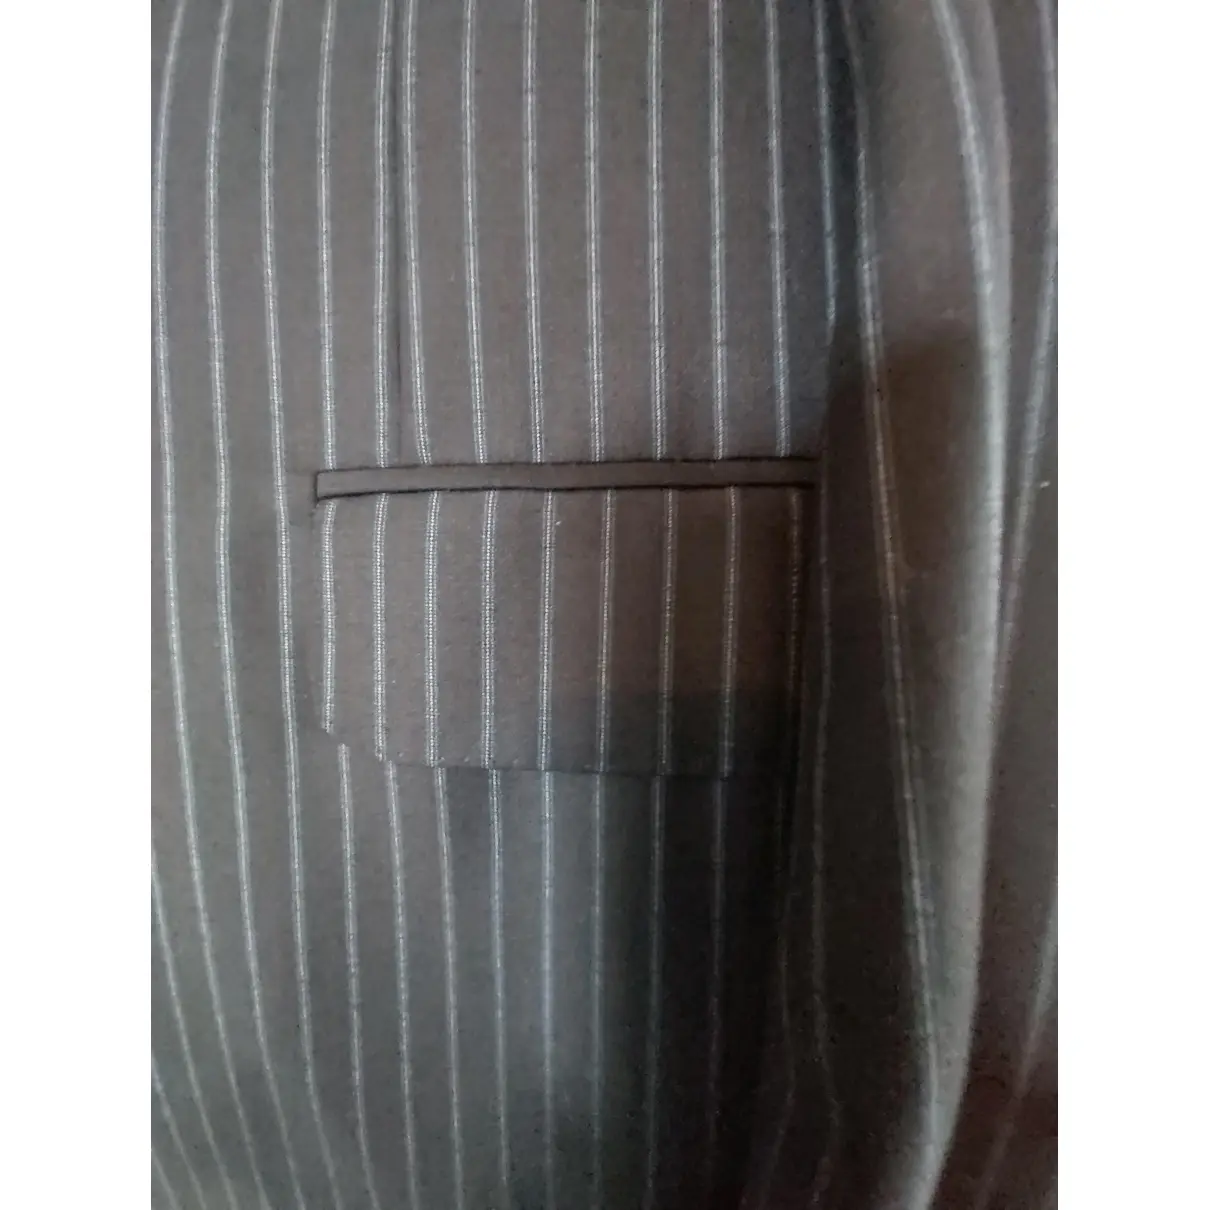 Canali Wool suit for sale - Vintage